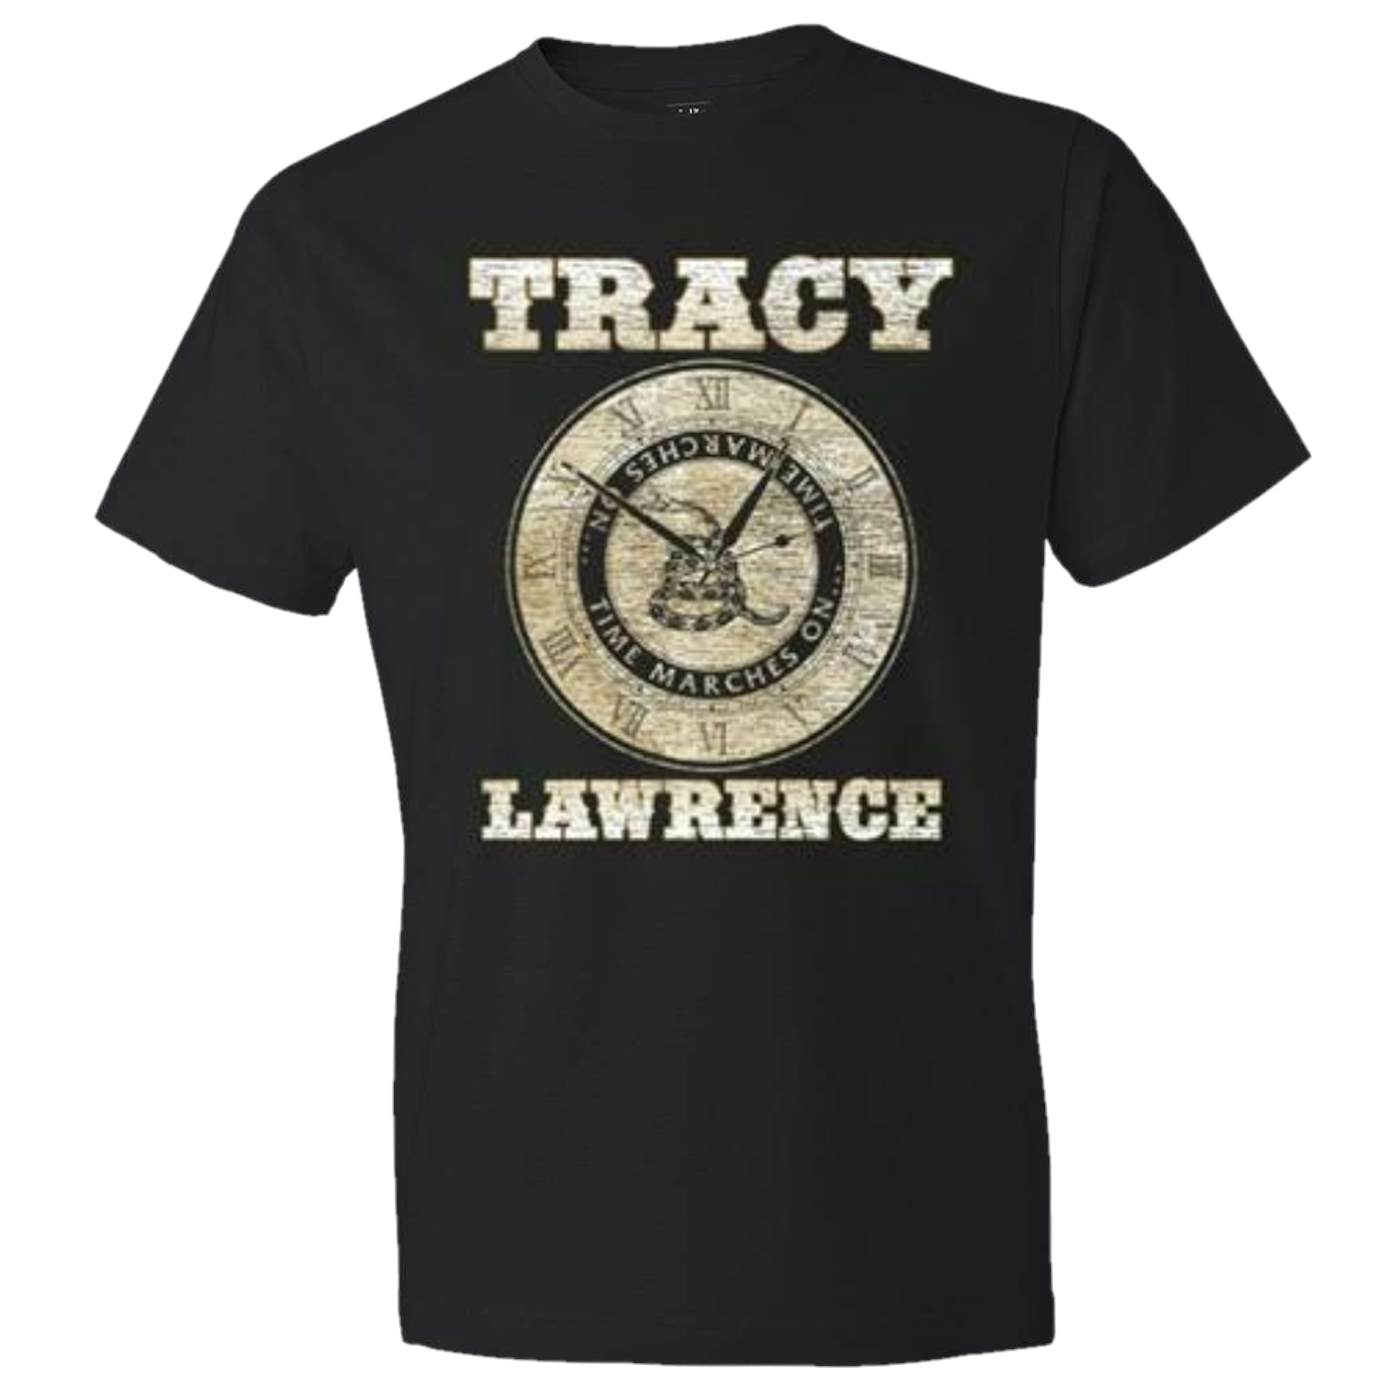 Tracy Lawrence Time Marches On Black Tee